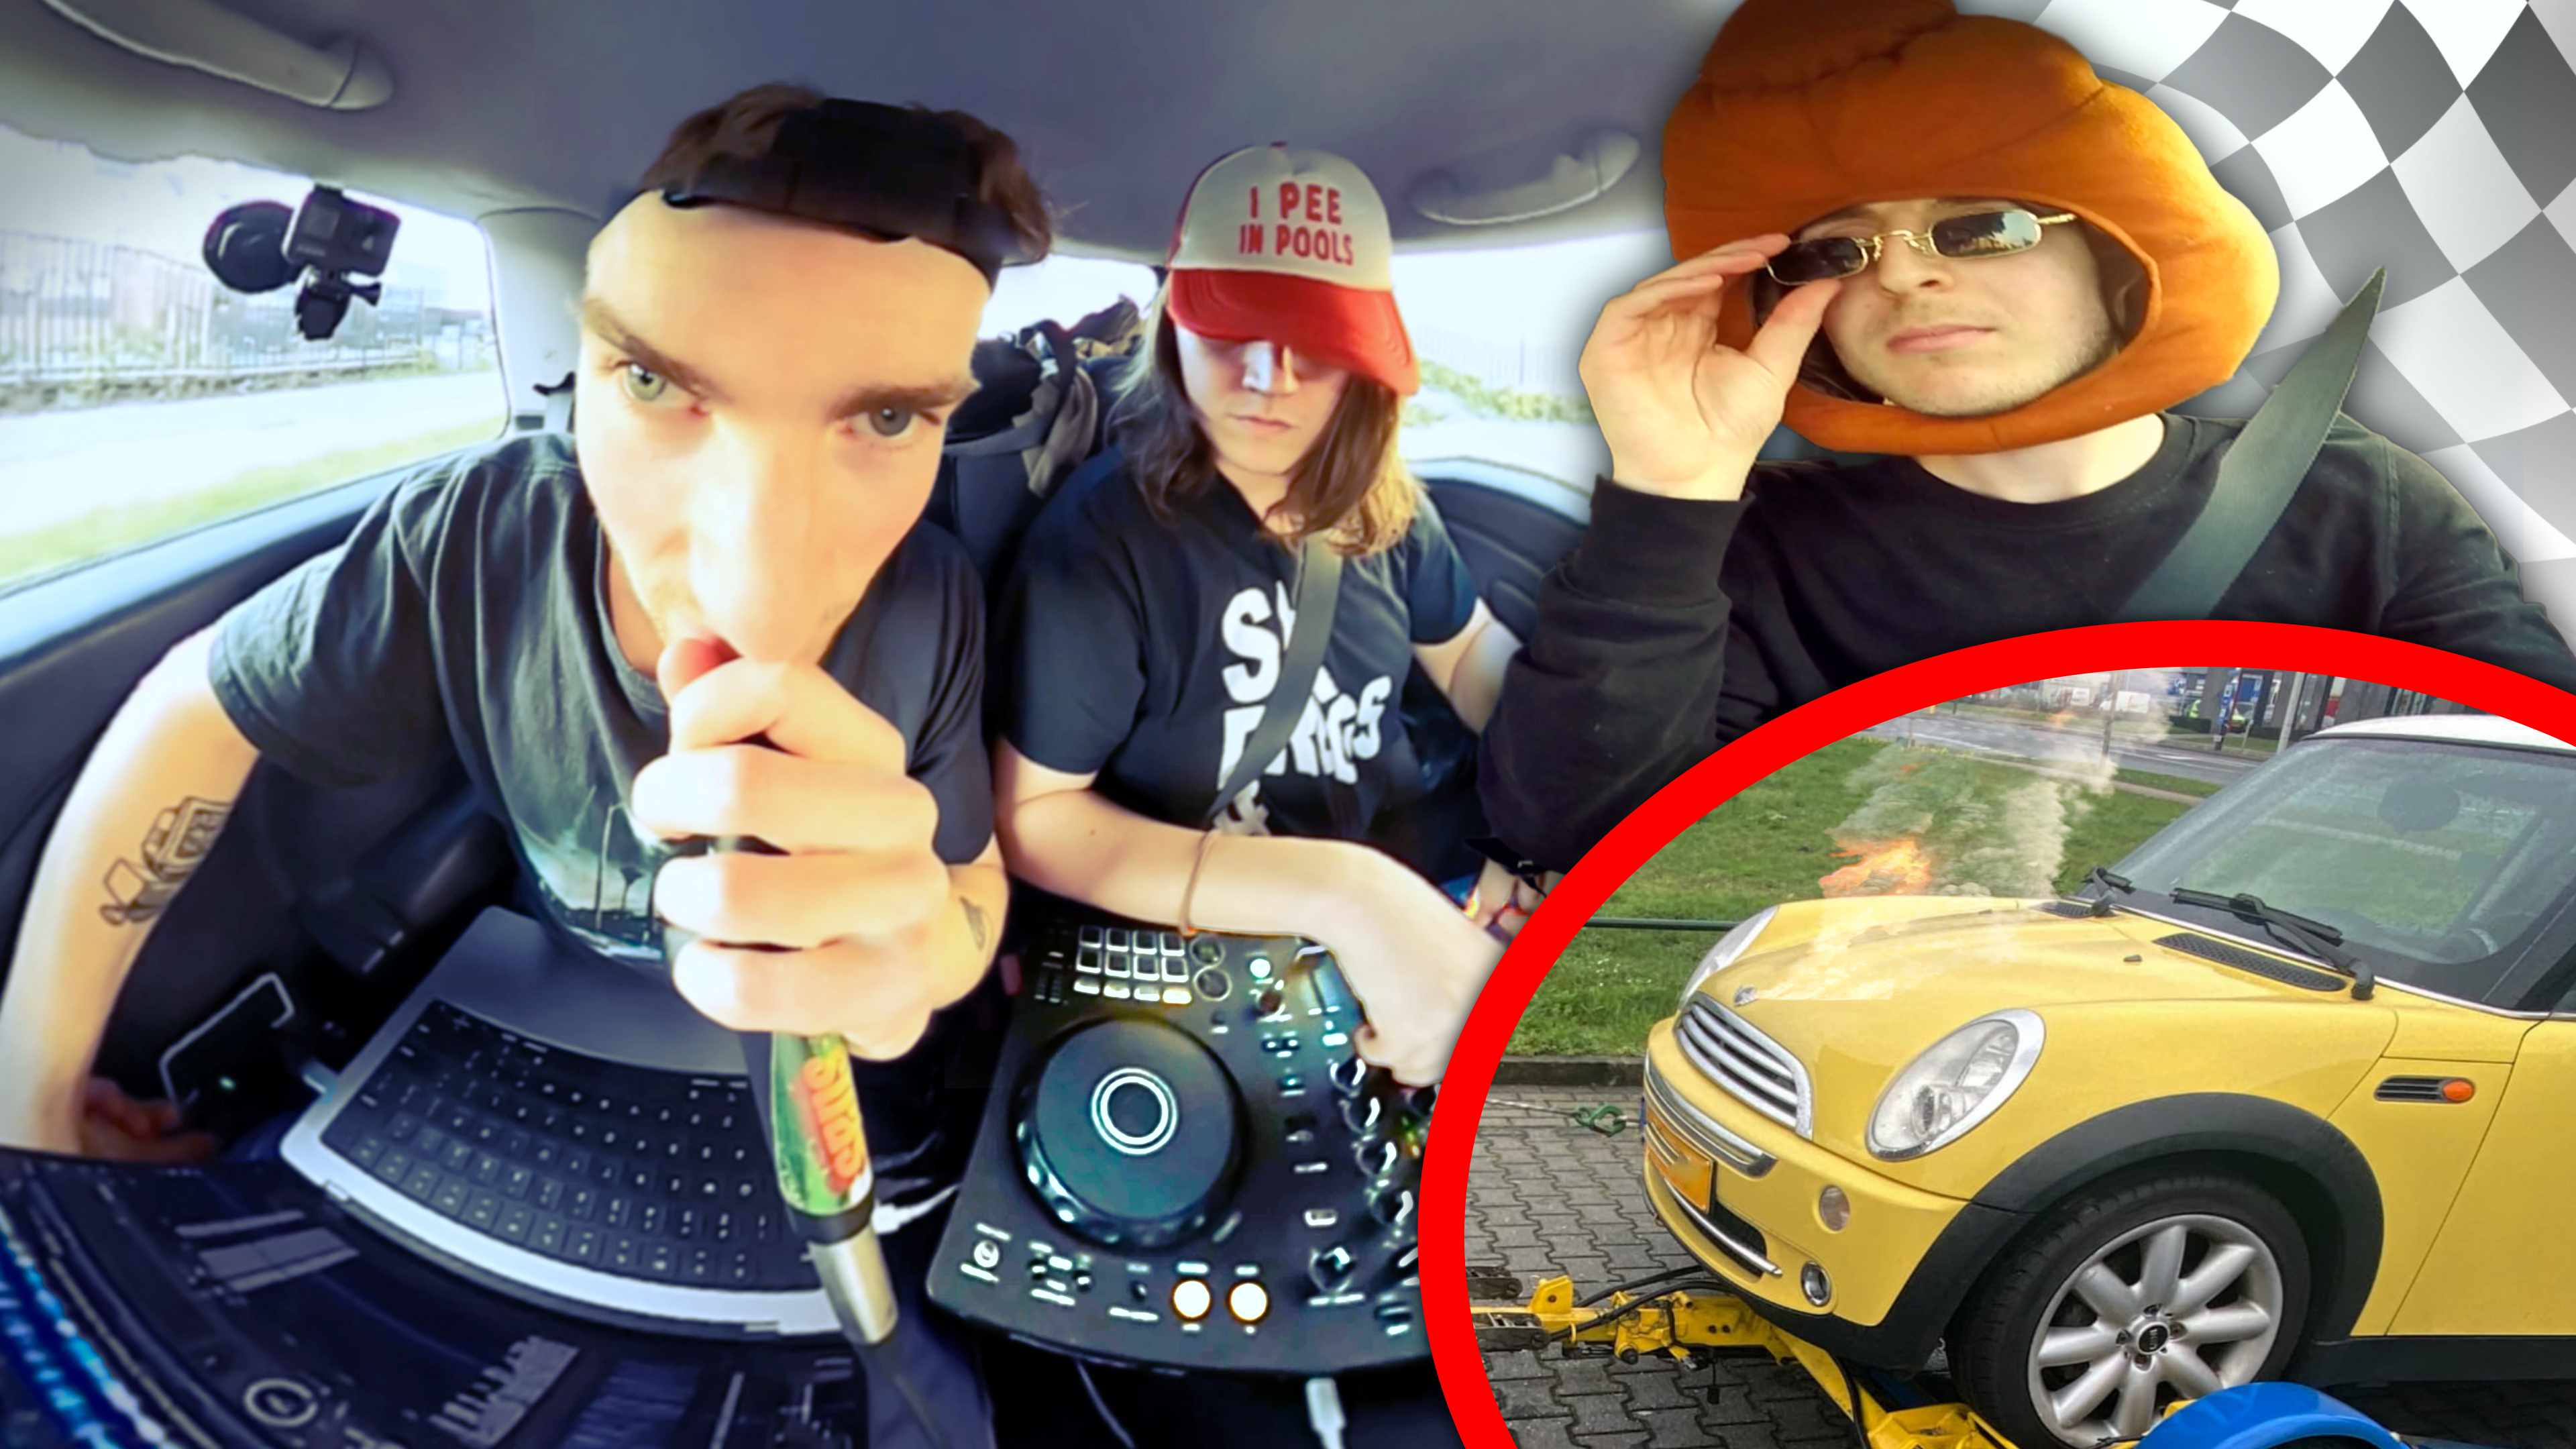 YouTube thumbnail for CAR SET by Explorers of the Internet (in the car)